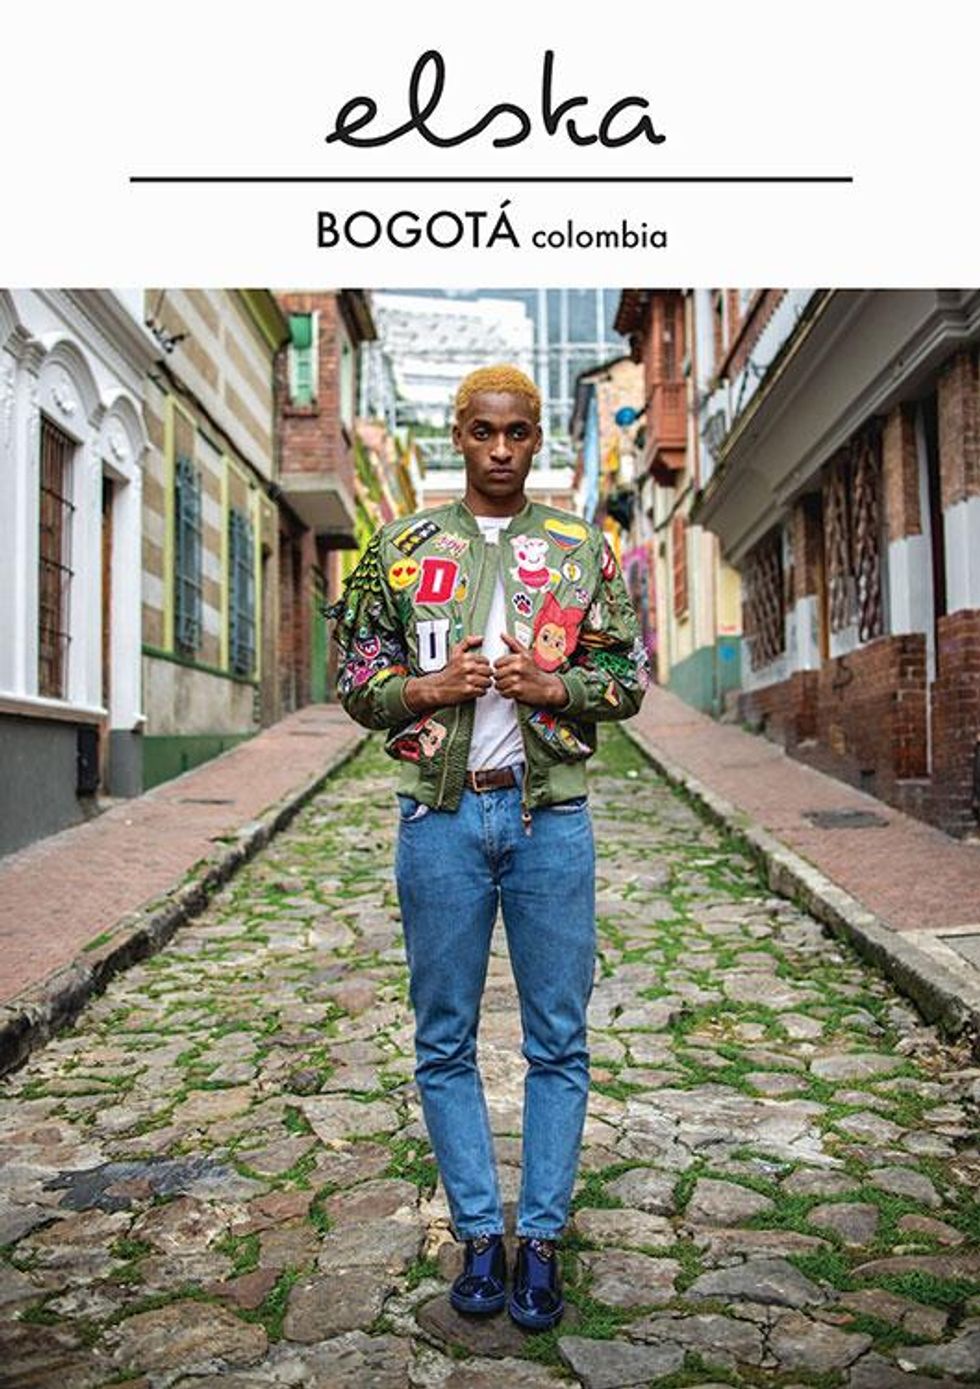 Elska Magazine visits its first Latin American country to meet and photograph the men of high-altitude Bogot\u00e1.